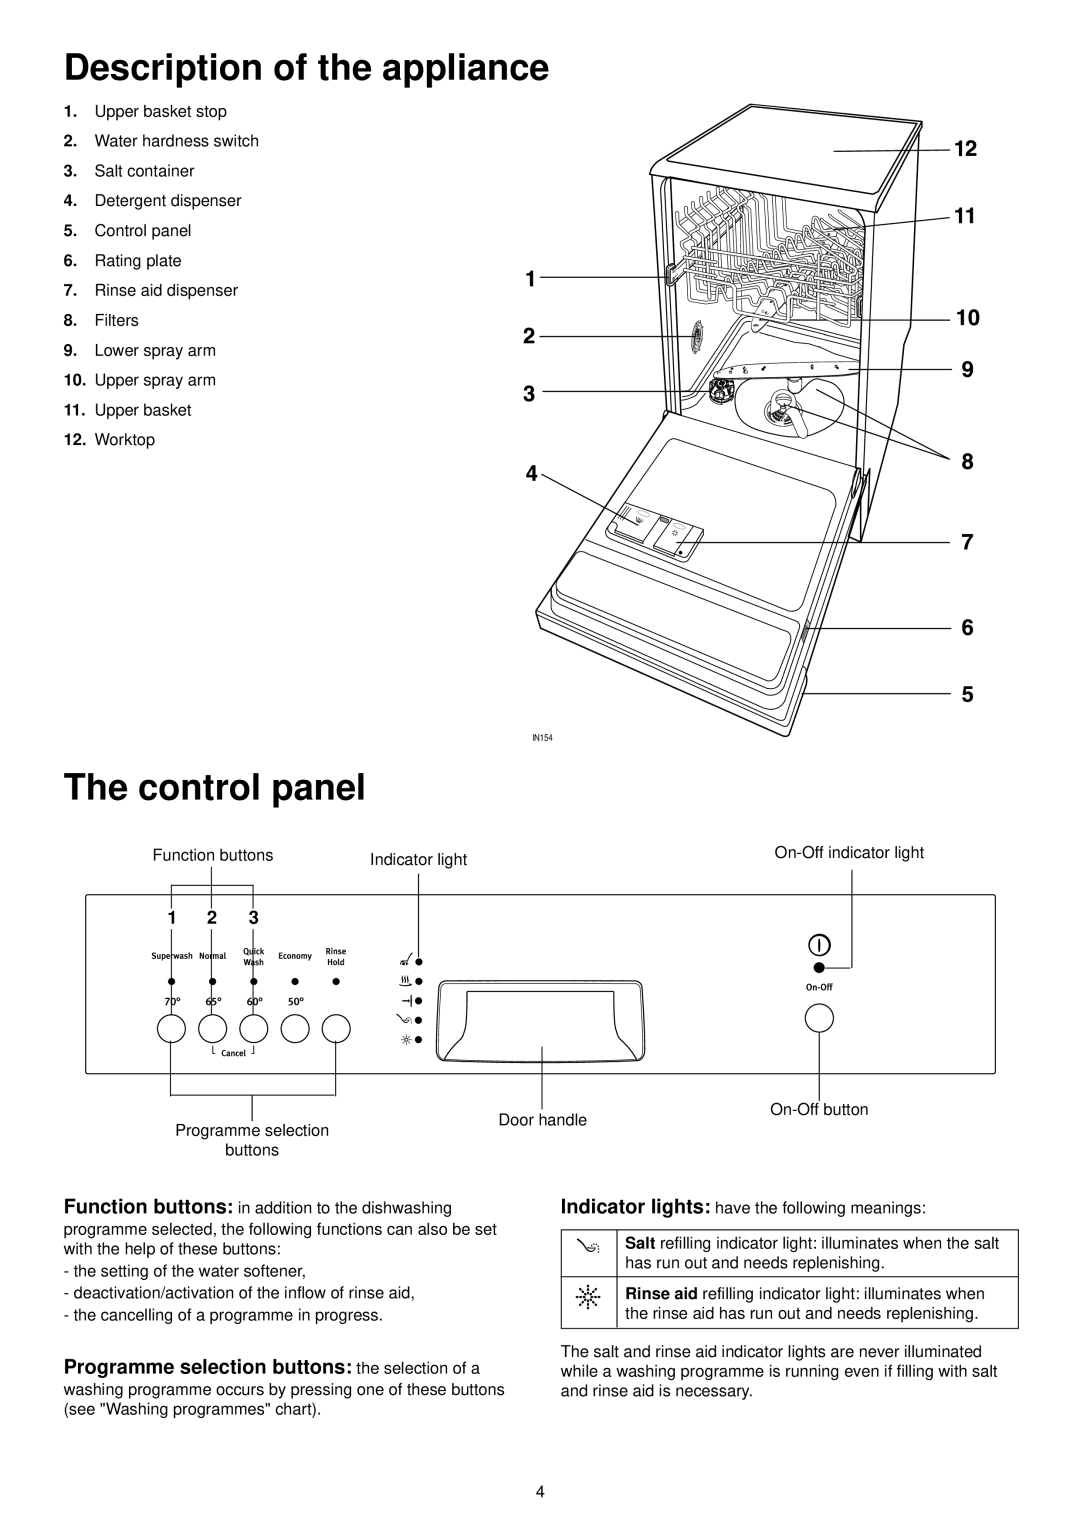 Zanussi ZSF 4111 Description of the appliance, The control panel, Control panel, Rating plate, Filters, Lower spray arm 